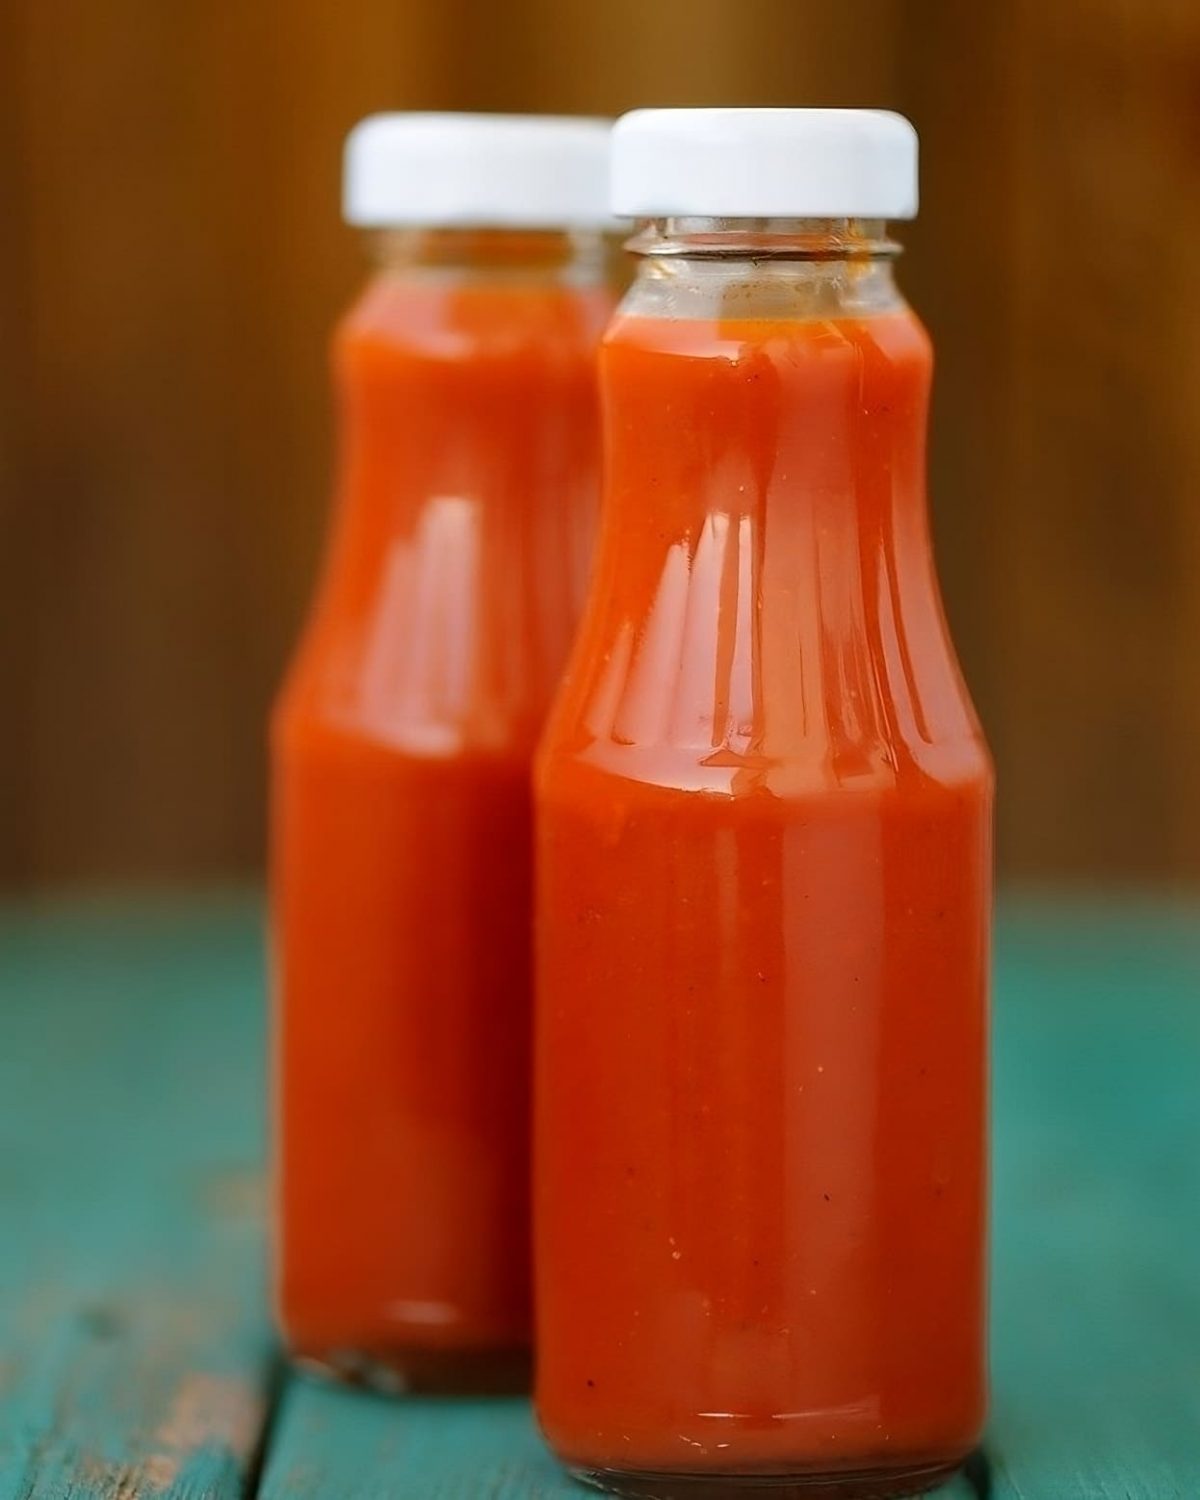 Tender homemade ketchup recipe with 3 ingredients